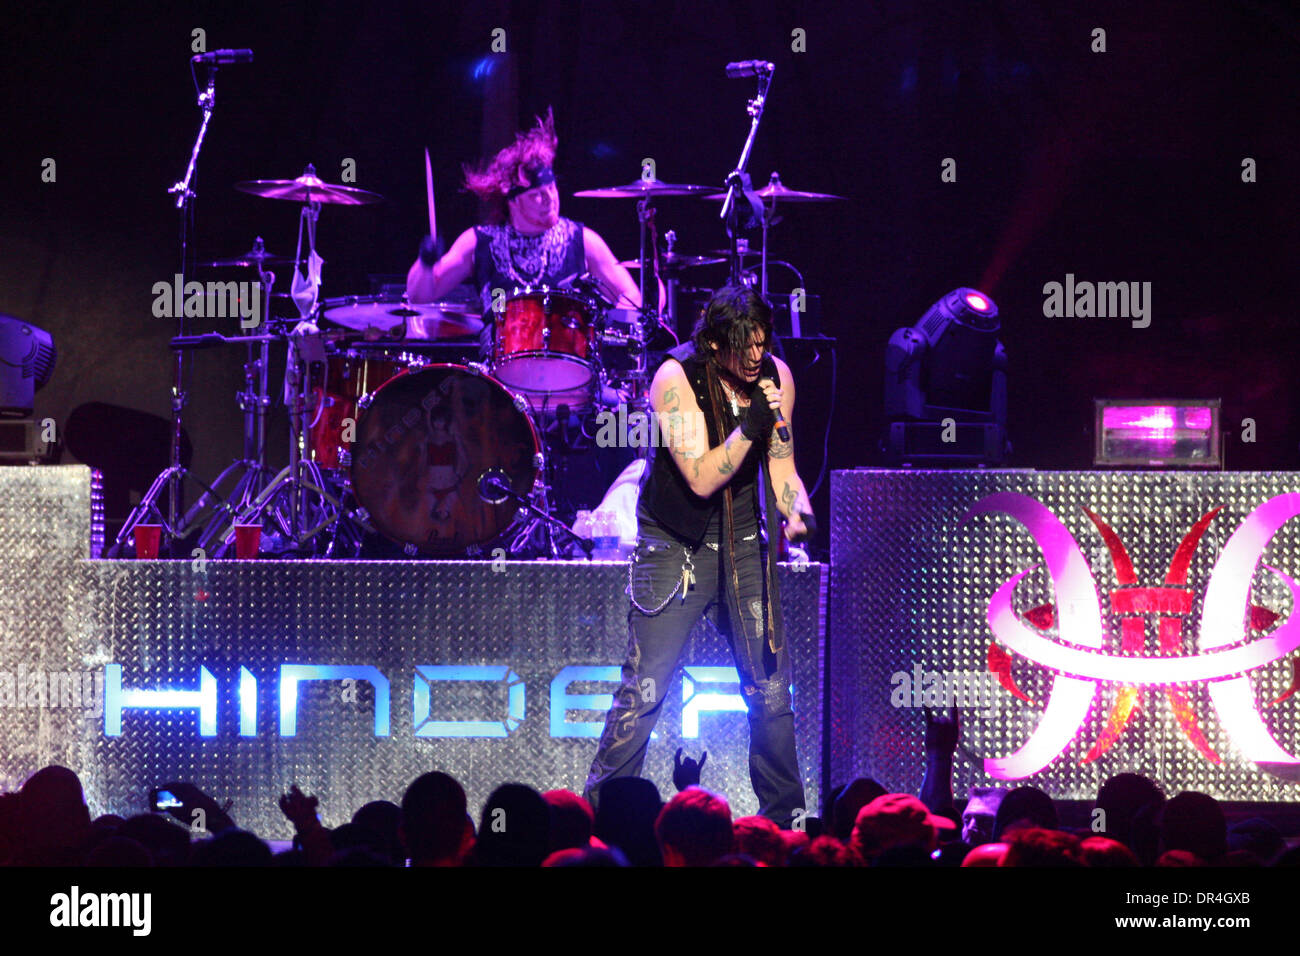 Feb 28, 2009 - New Orleans, Louisiana, USA - AUSTIN WINKLER of band HINDER performs on stage during the Motley Crue Saints of Los Angeles Tour that made a stop at the New Orleans Arena in New Orleans, Louisiana. (Credit Image: © Derick Hingle/Southcreek EMI/ZUMA Press) Stock Photo